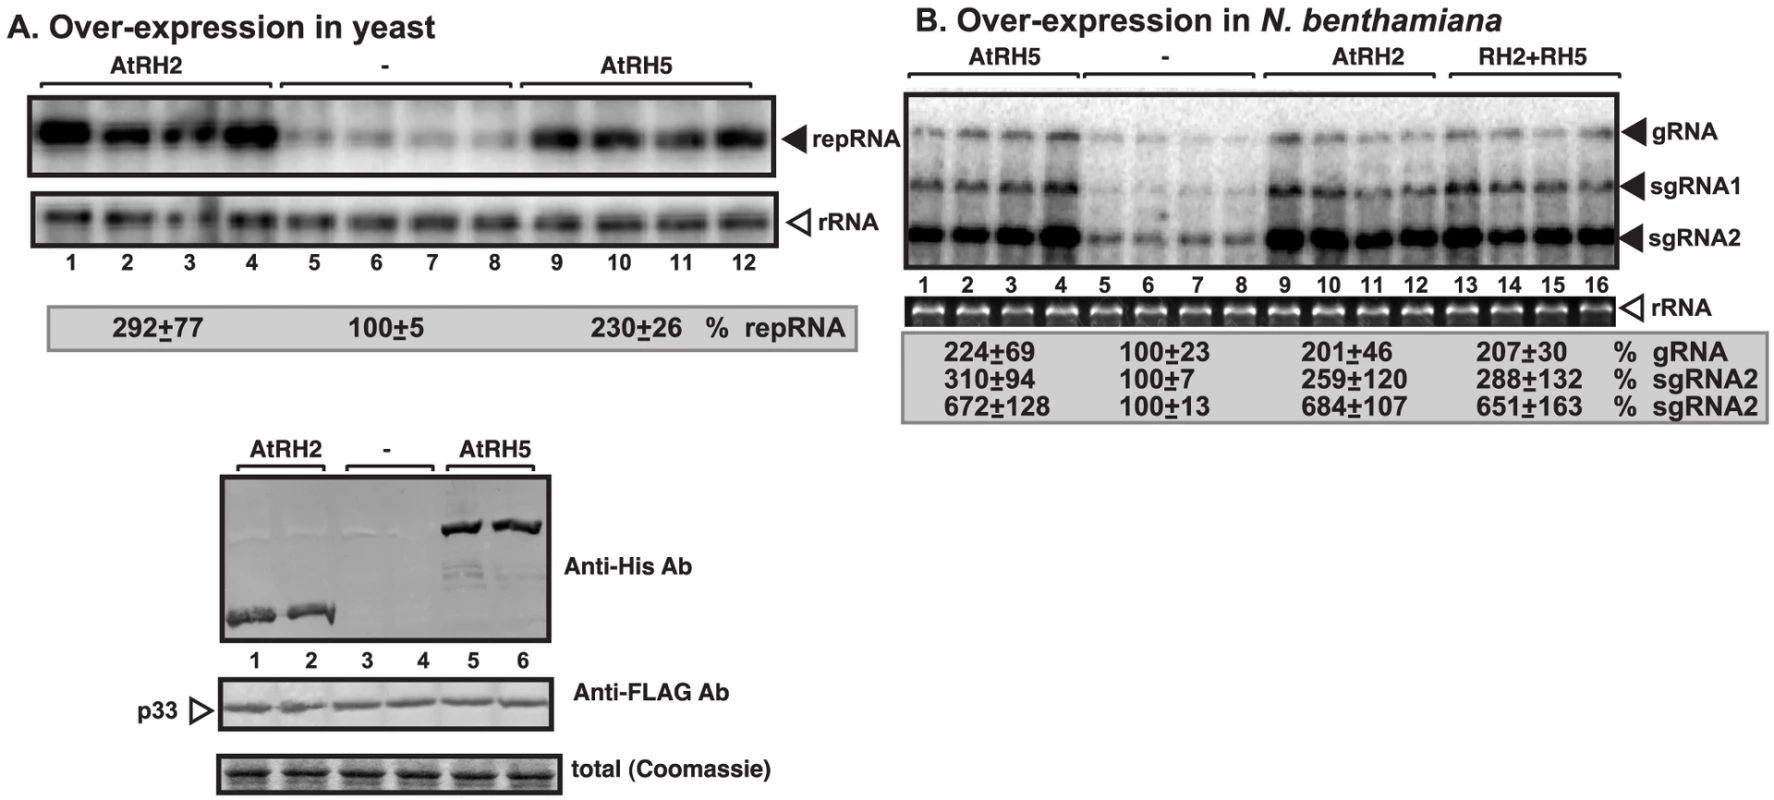 Stimulation of tombusvirus RNA accumulation by over-expression of the eIF4IIIA-like AtRH2 and the DDX5-like AtRH5 DEAD-box helicases in yeast and <i>N. benthamiana</i>.